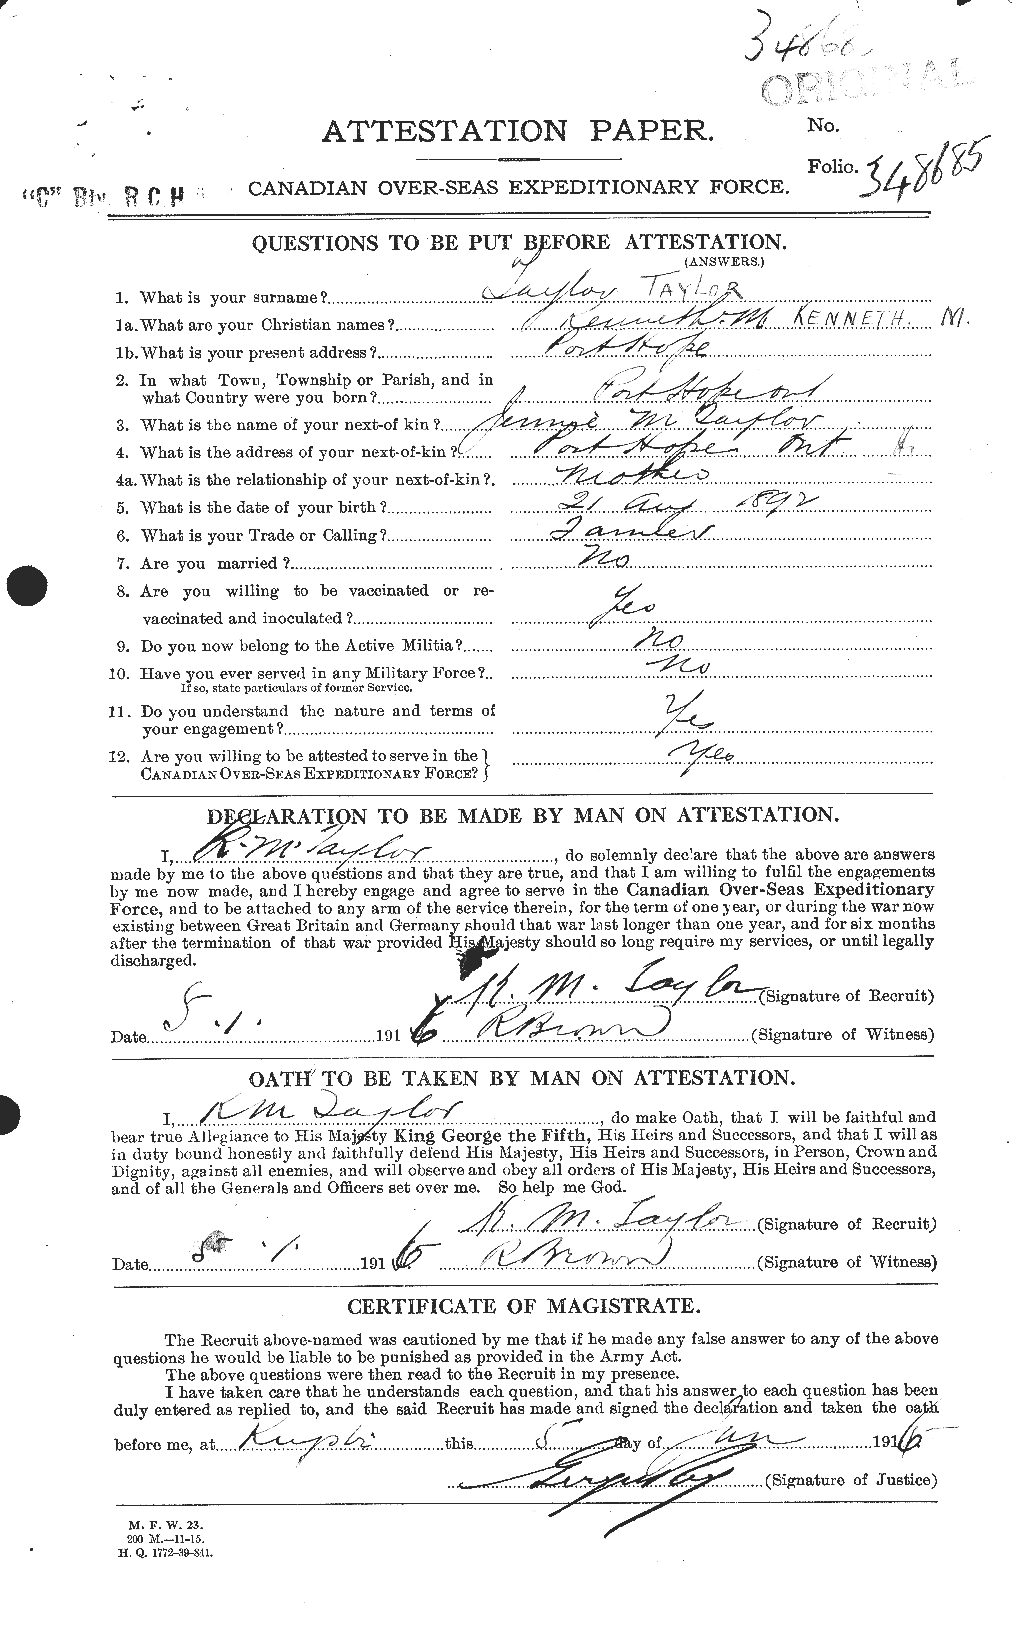 Personnel Records of the First World War - CEF 627599a